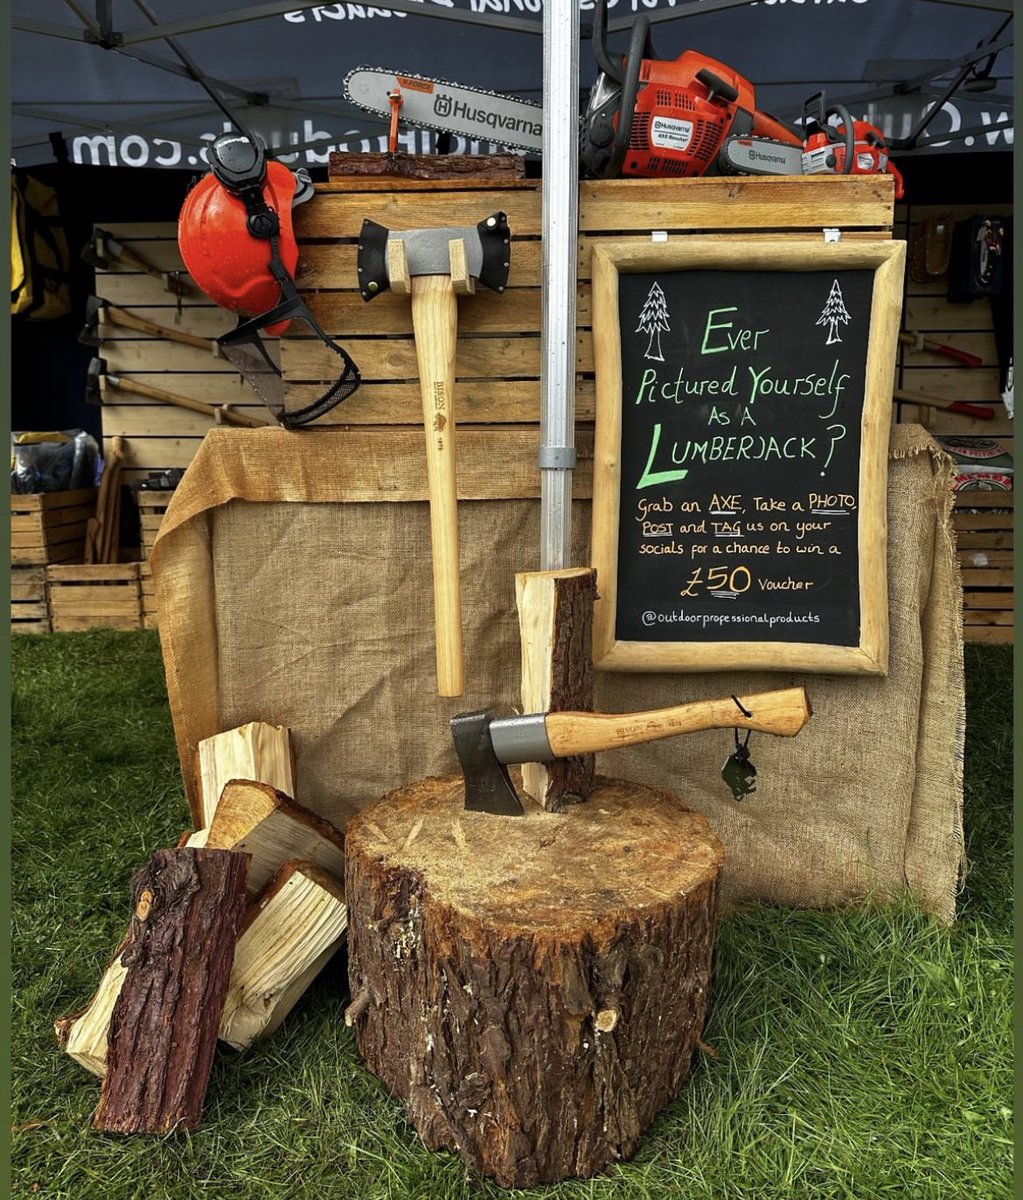 Ever pictured yourself as a lumberjack? @EAGandCFair - #outdoorprofessionalproducts